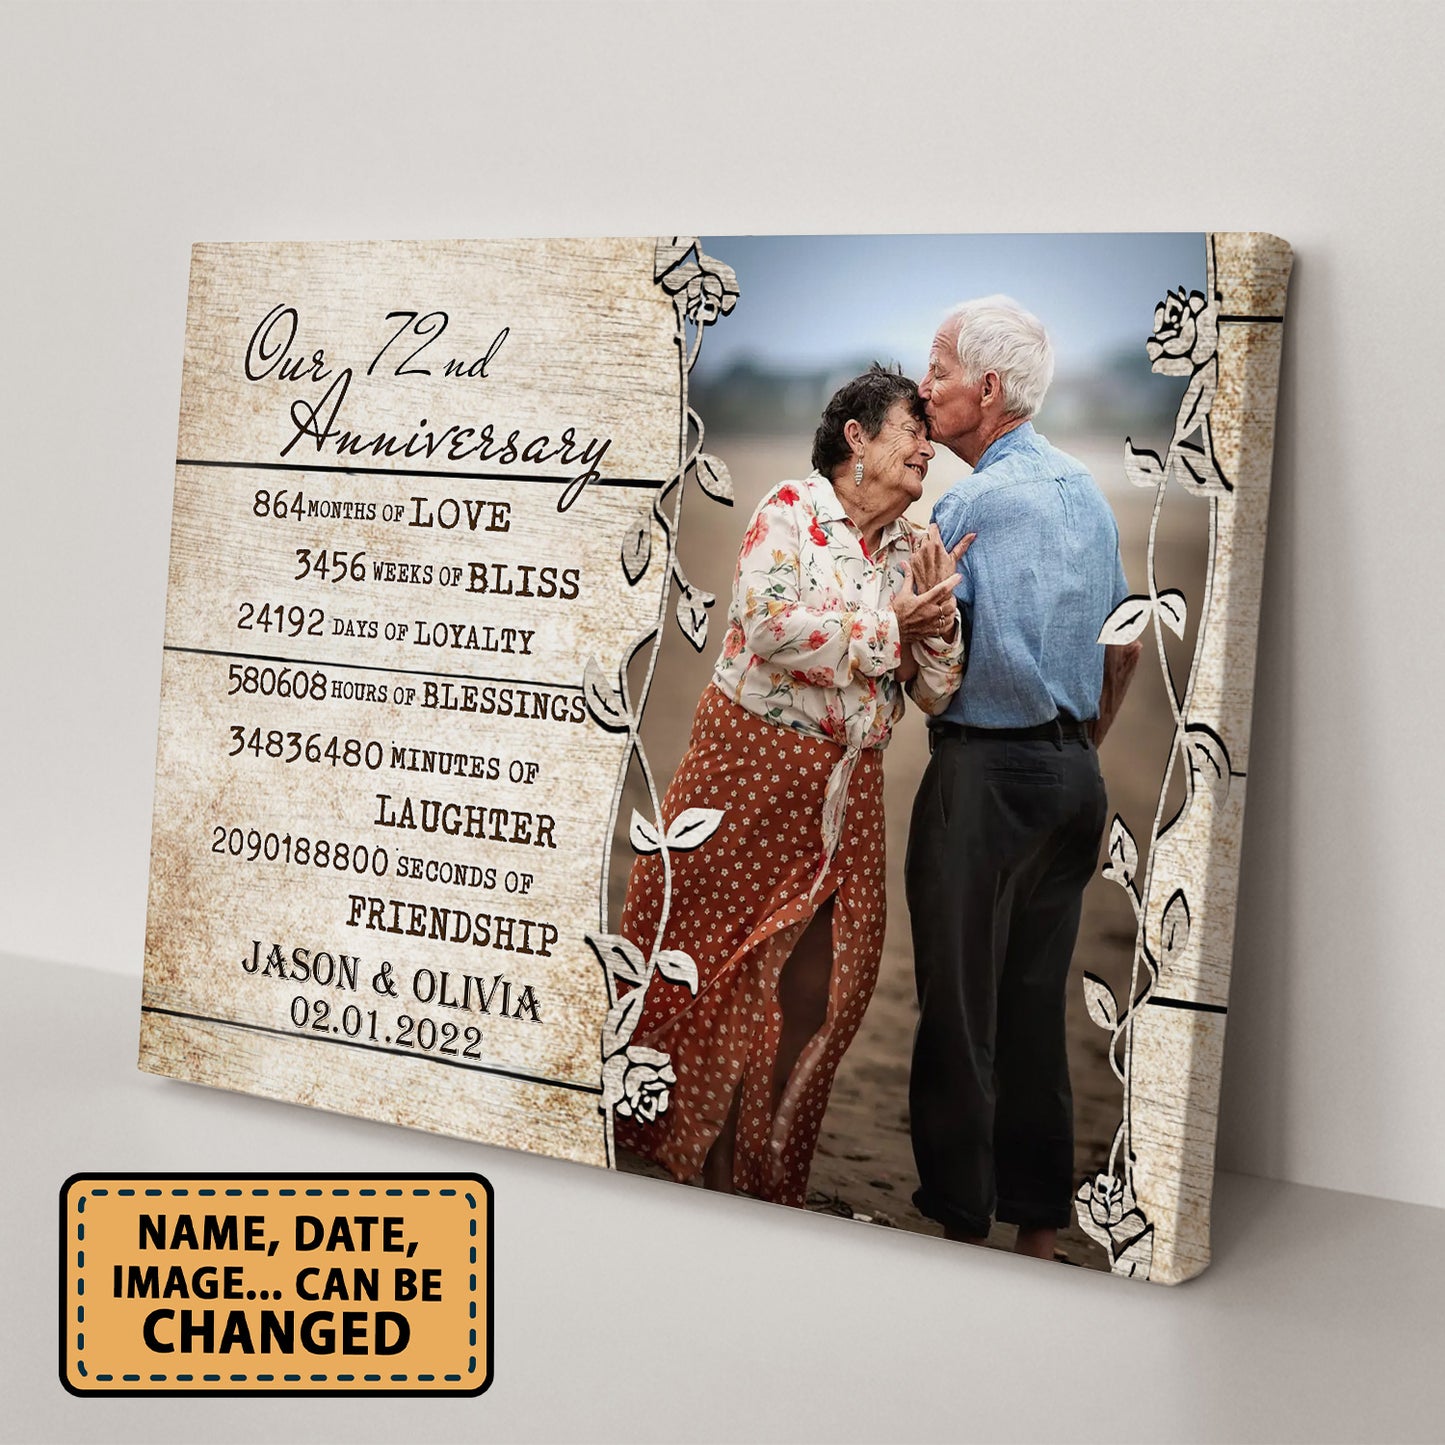 Our 72nd Anniversary Timeless love Valentine Gift Personalized Canvas